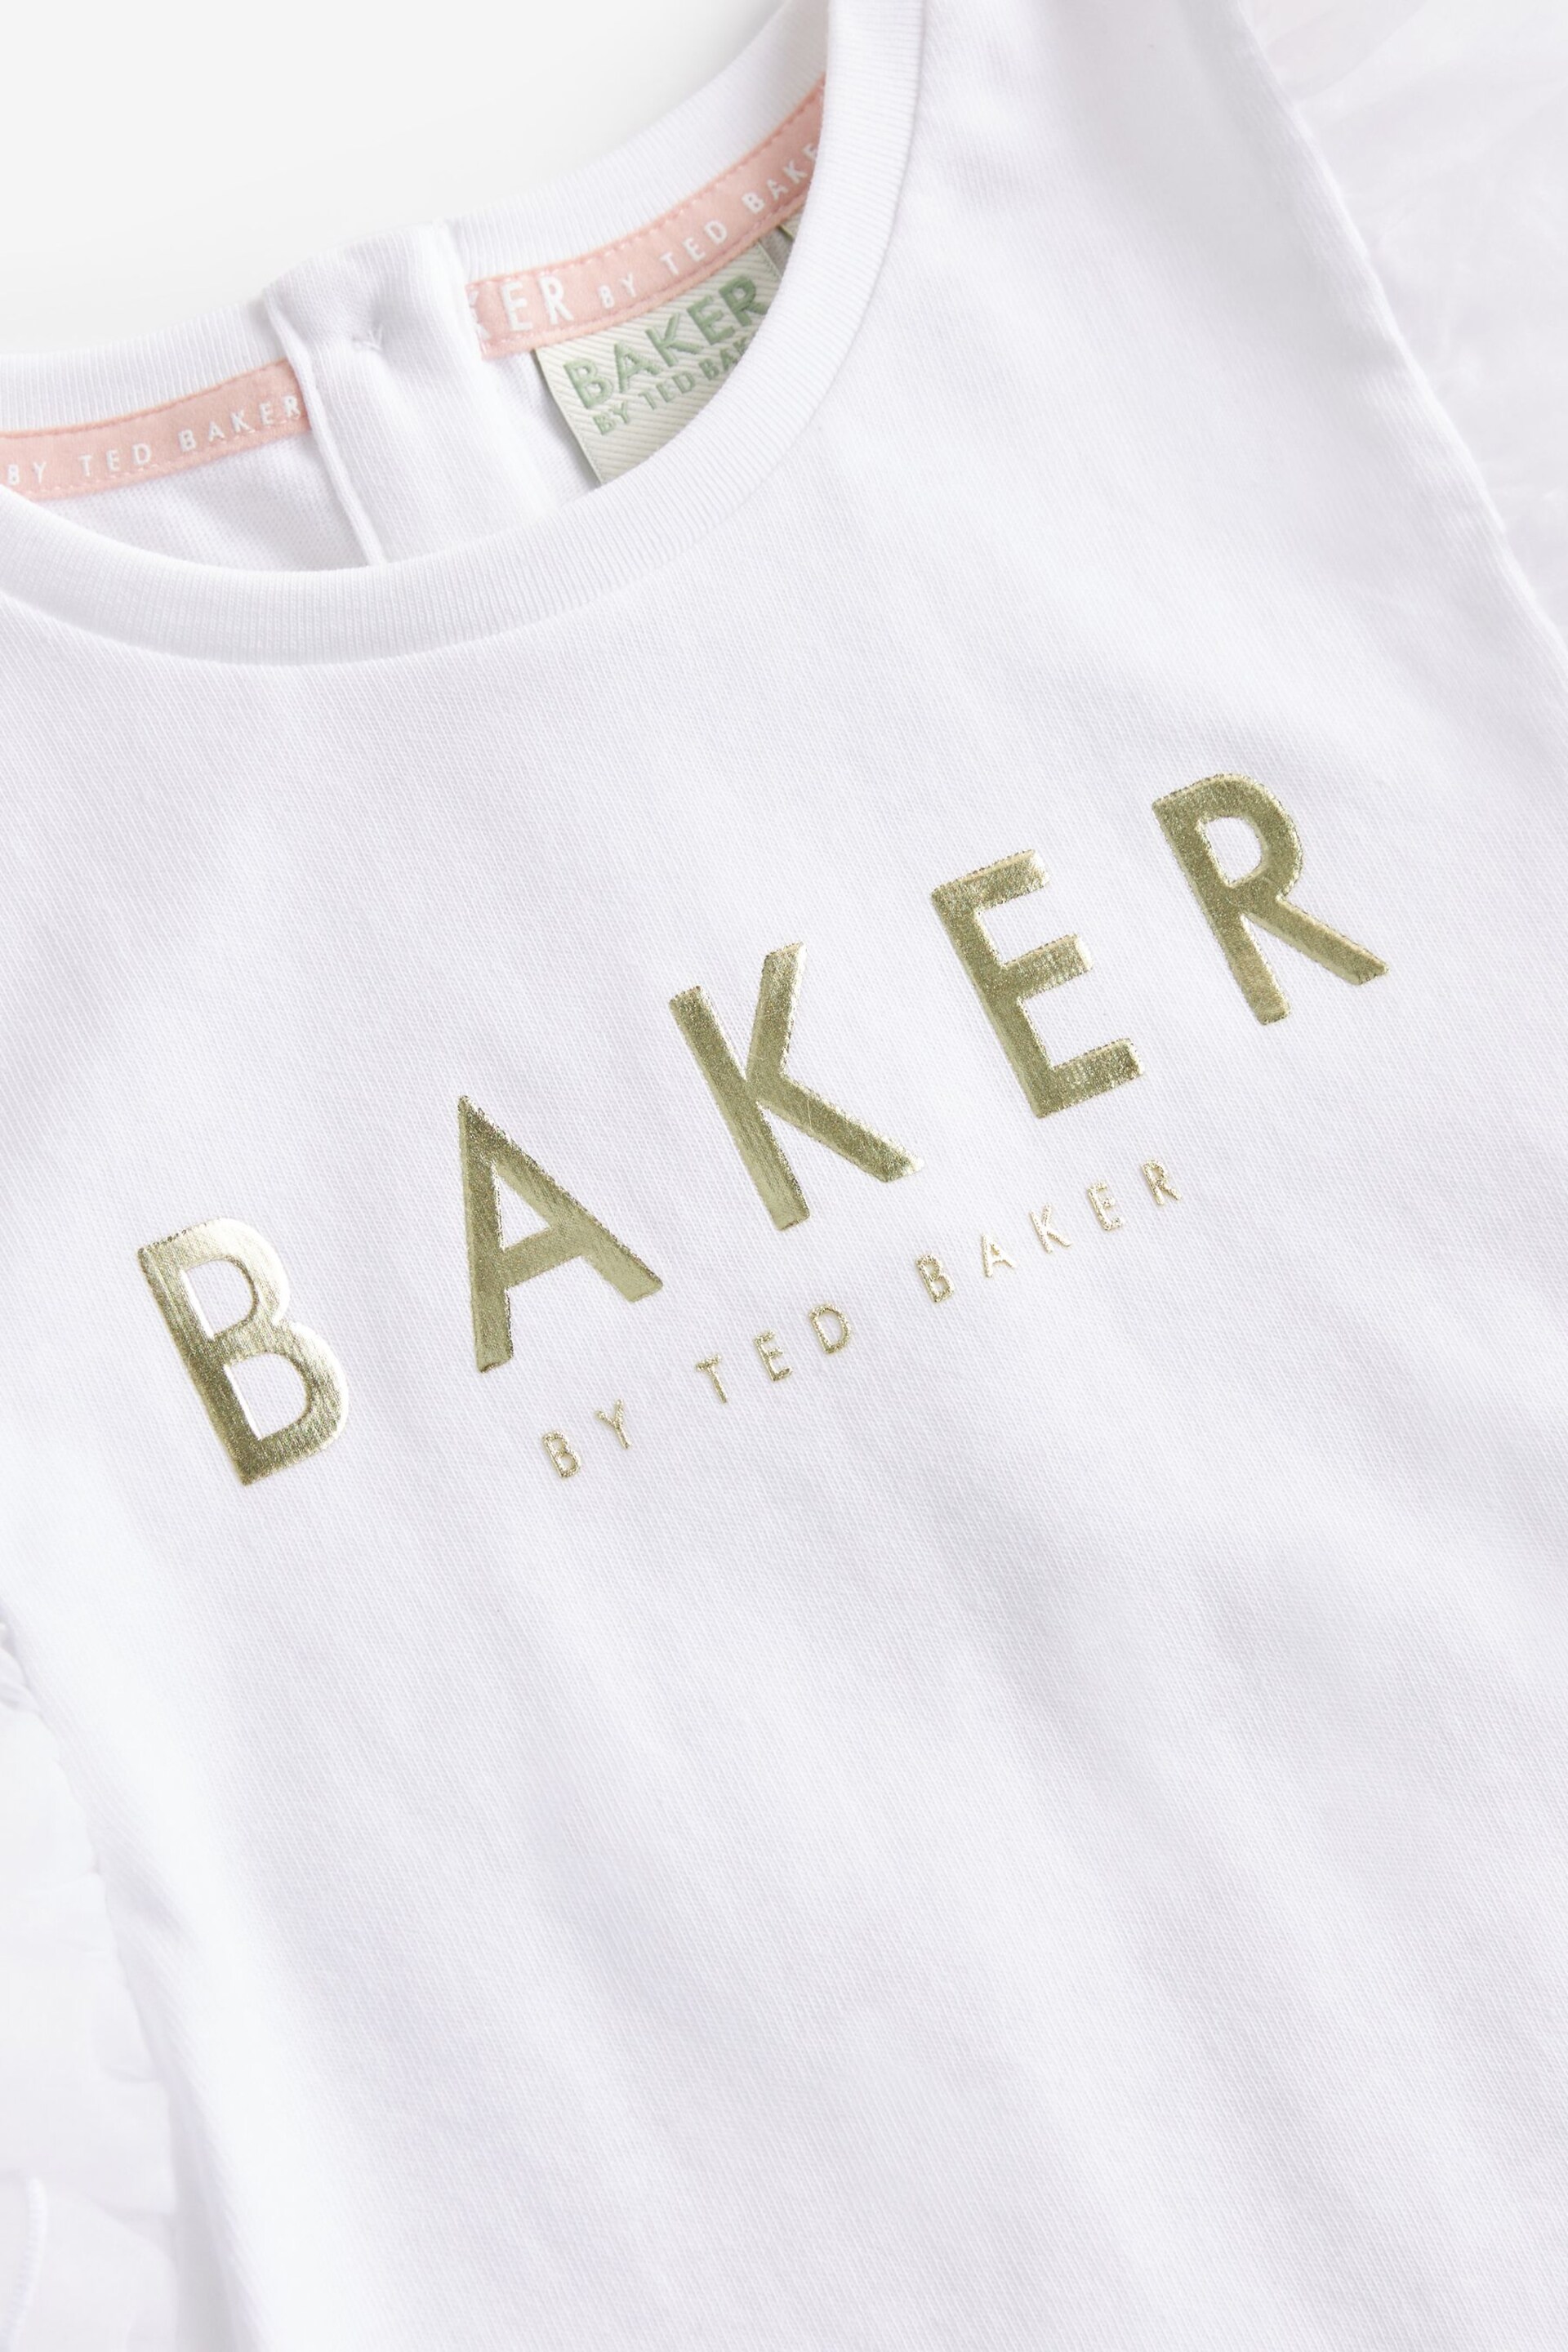 Baker by Ted Baker Organza T-Shirt - Image 3 of 4